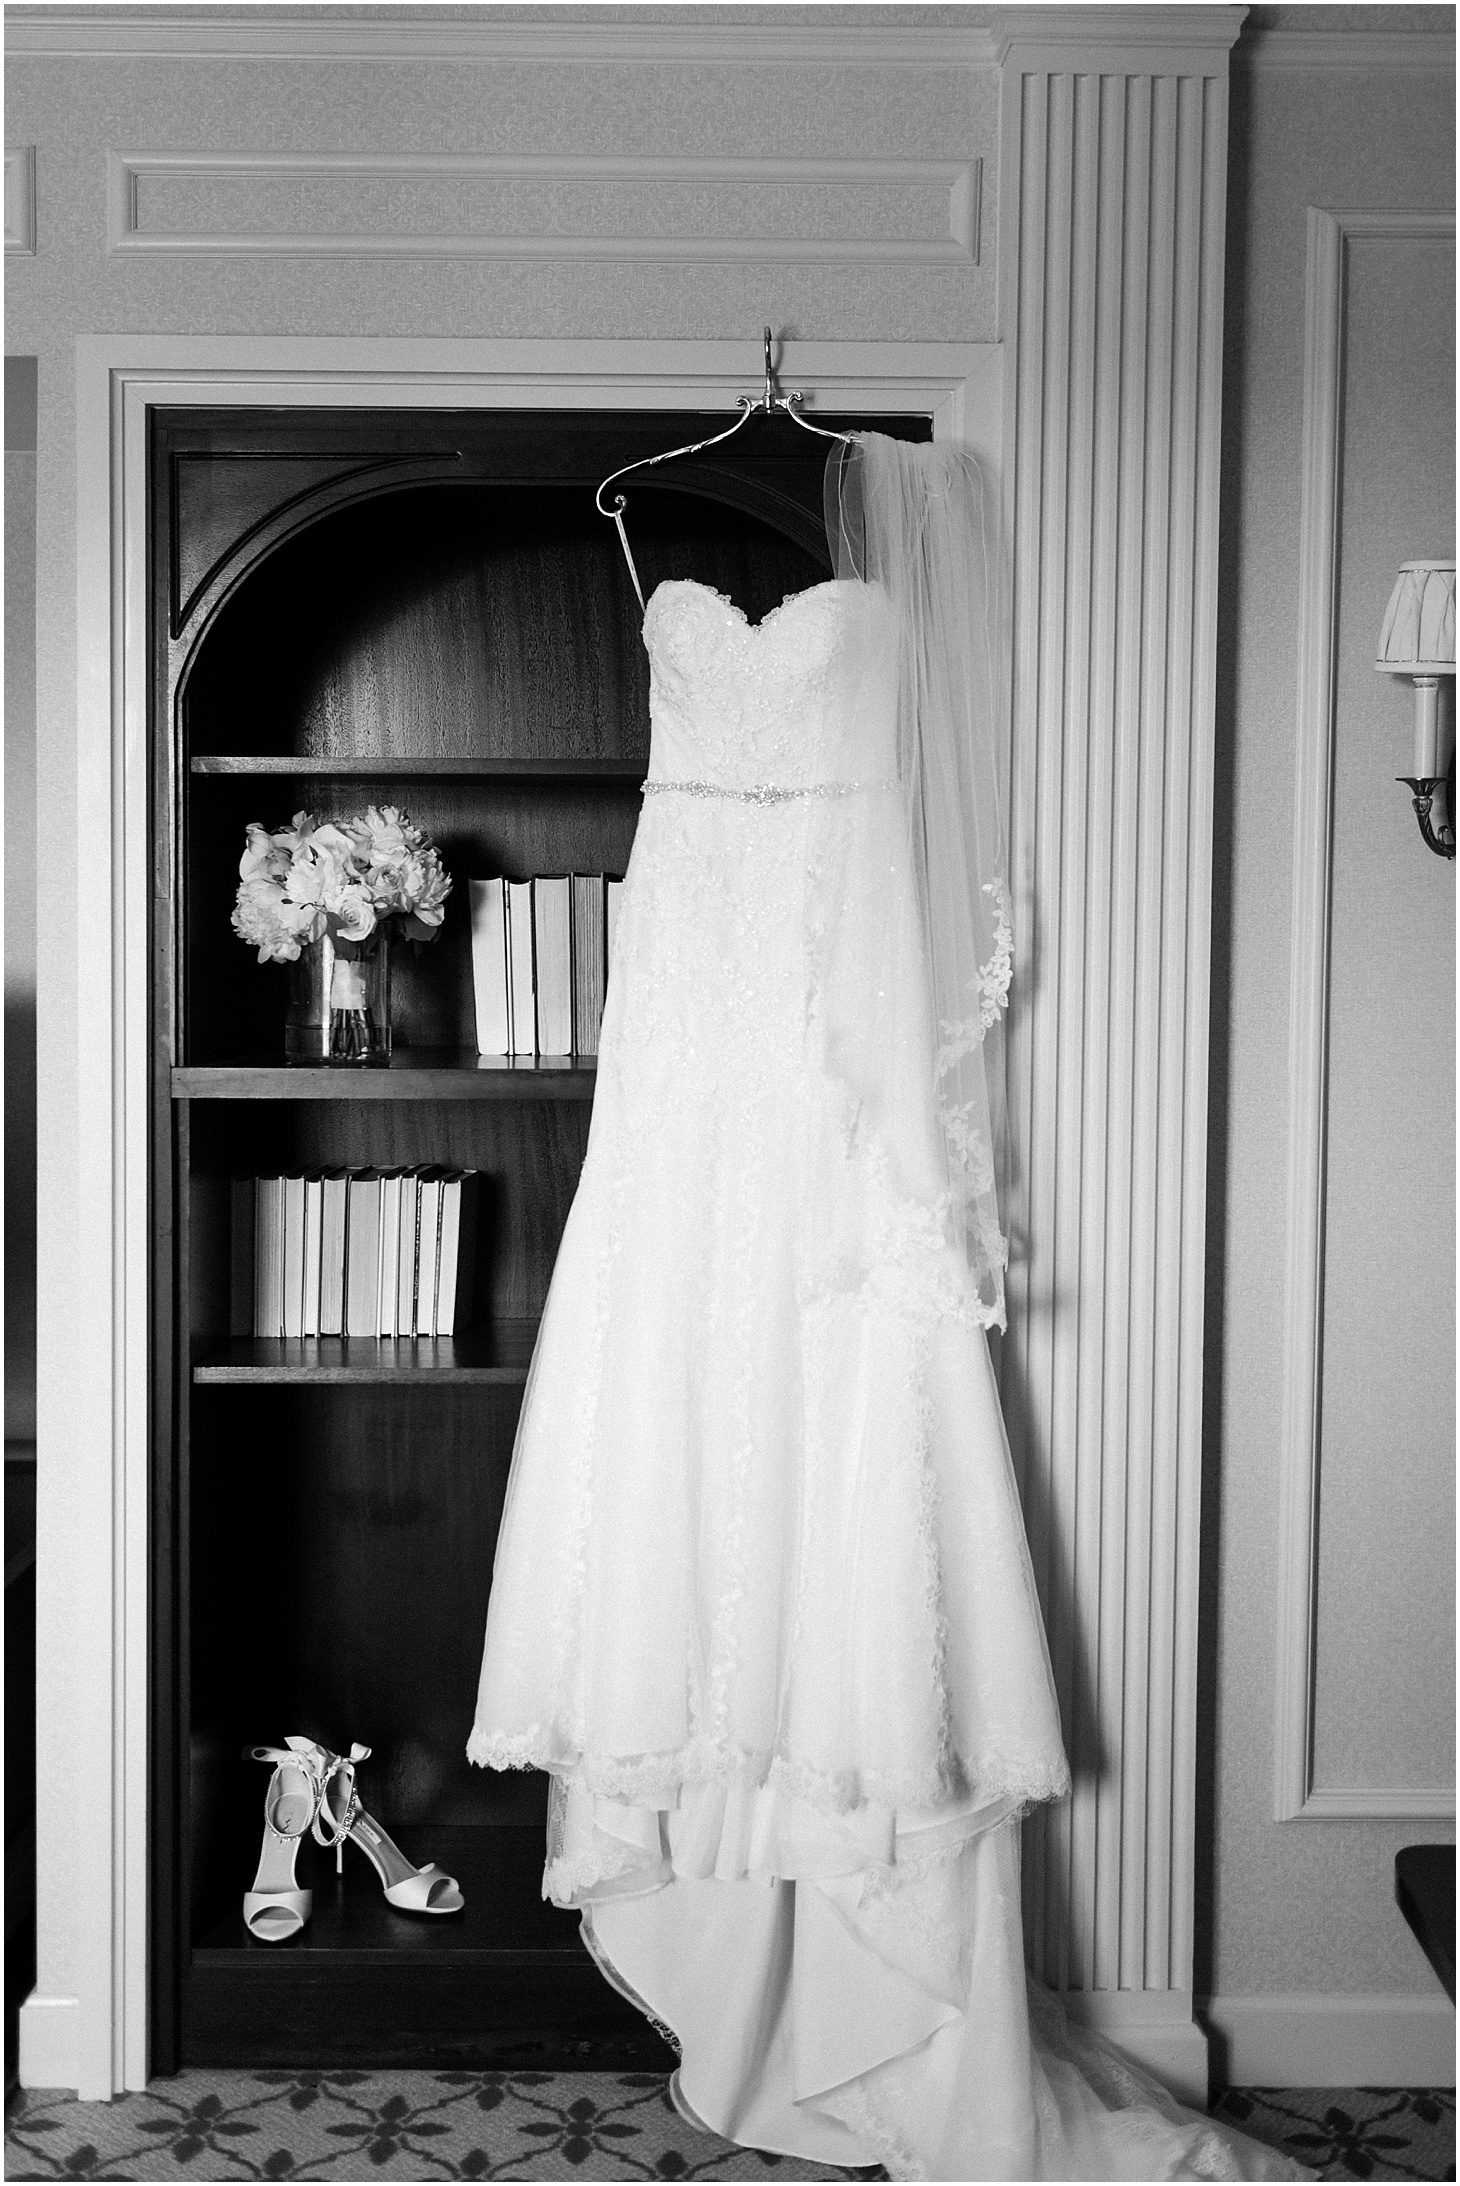 Luna Novias Wedding Gown at Willard Intercontinental Hotel in DC, Navy and Blush Summer Wedding at the Army and Navy Club, Ceremony at Capitol Hill Baptist Church, Sarah Bradshaw Photography, DC Wedding Photographer